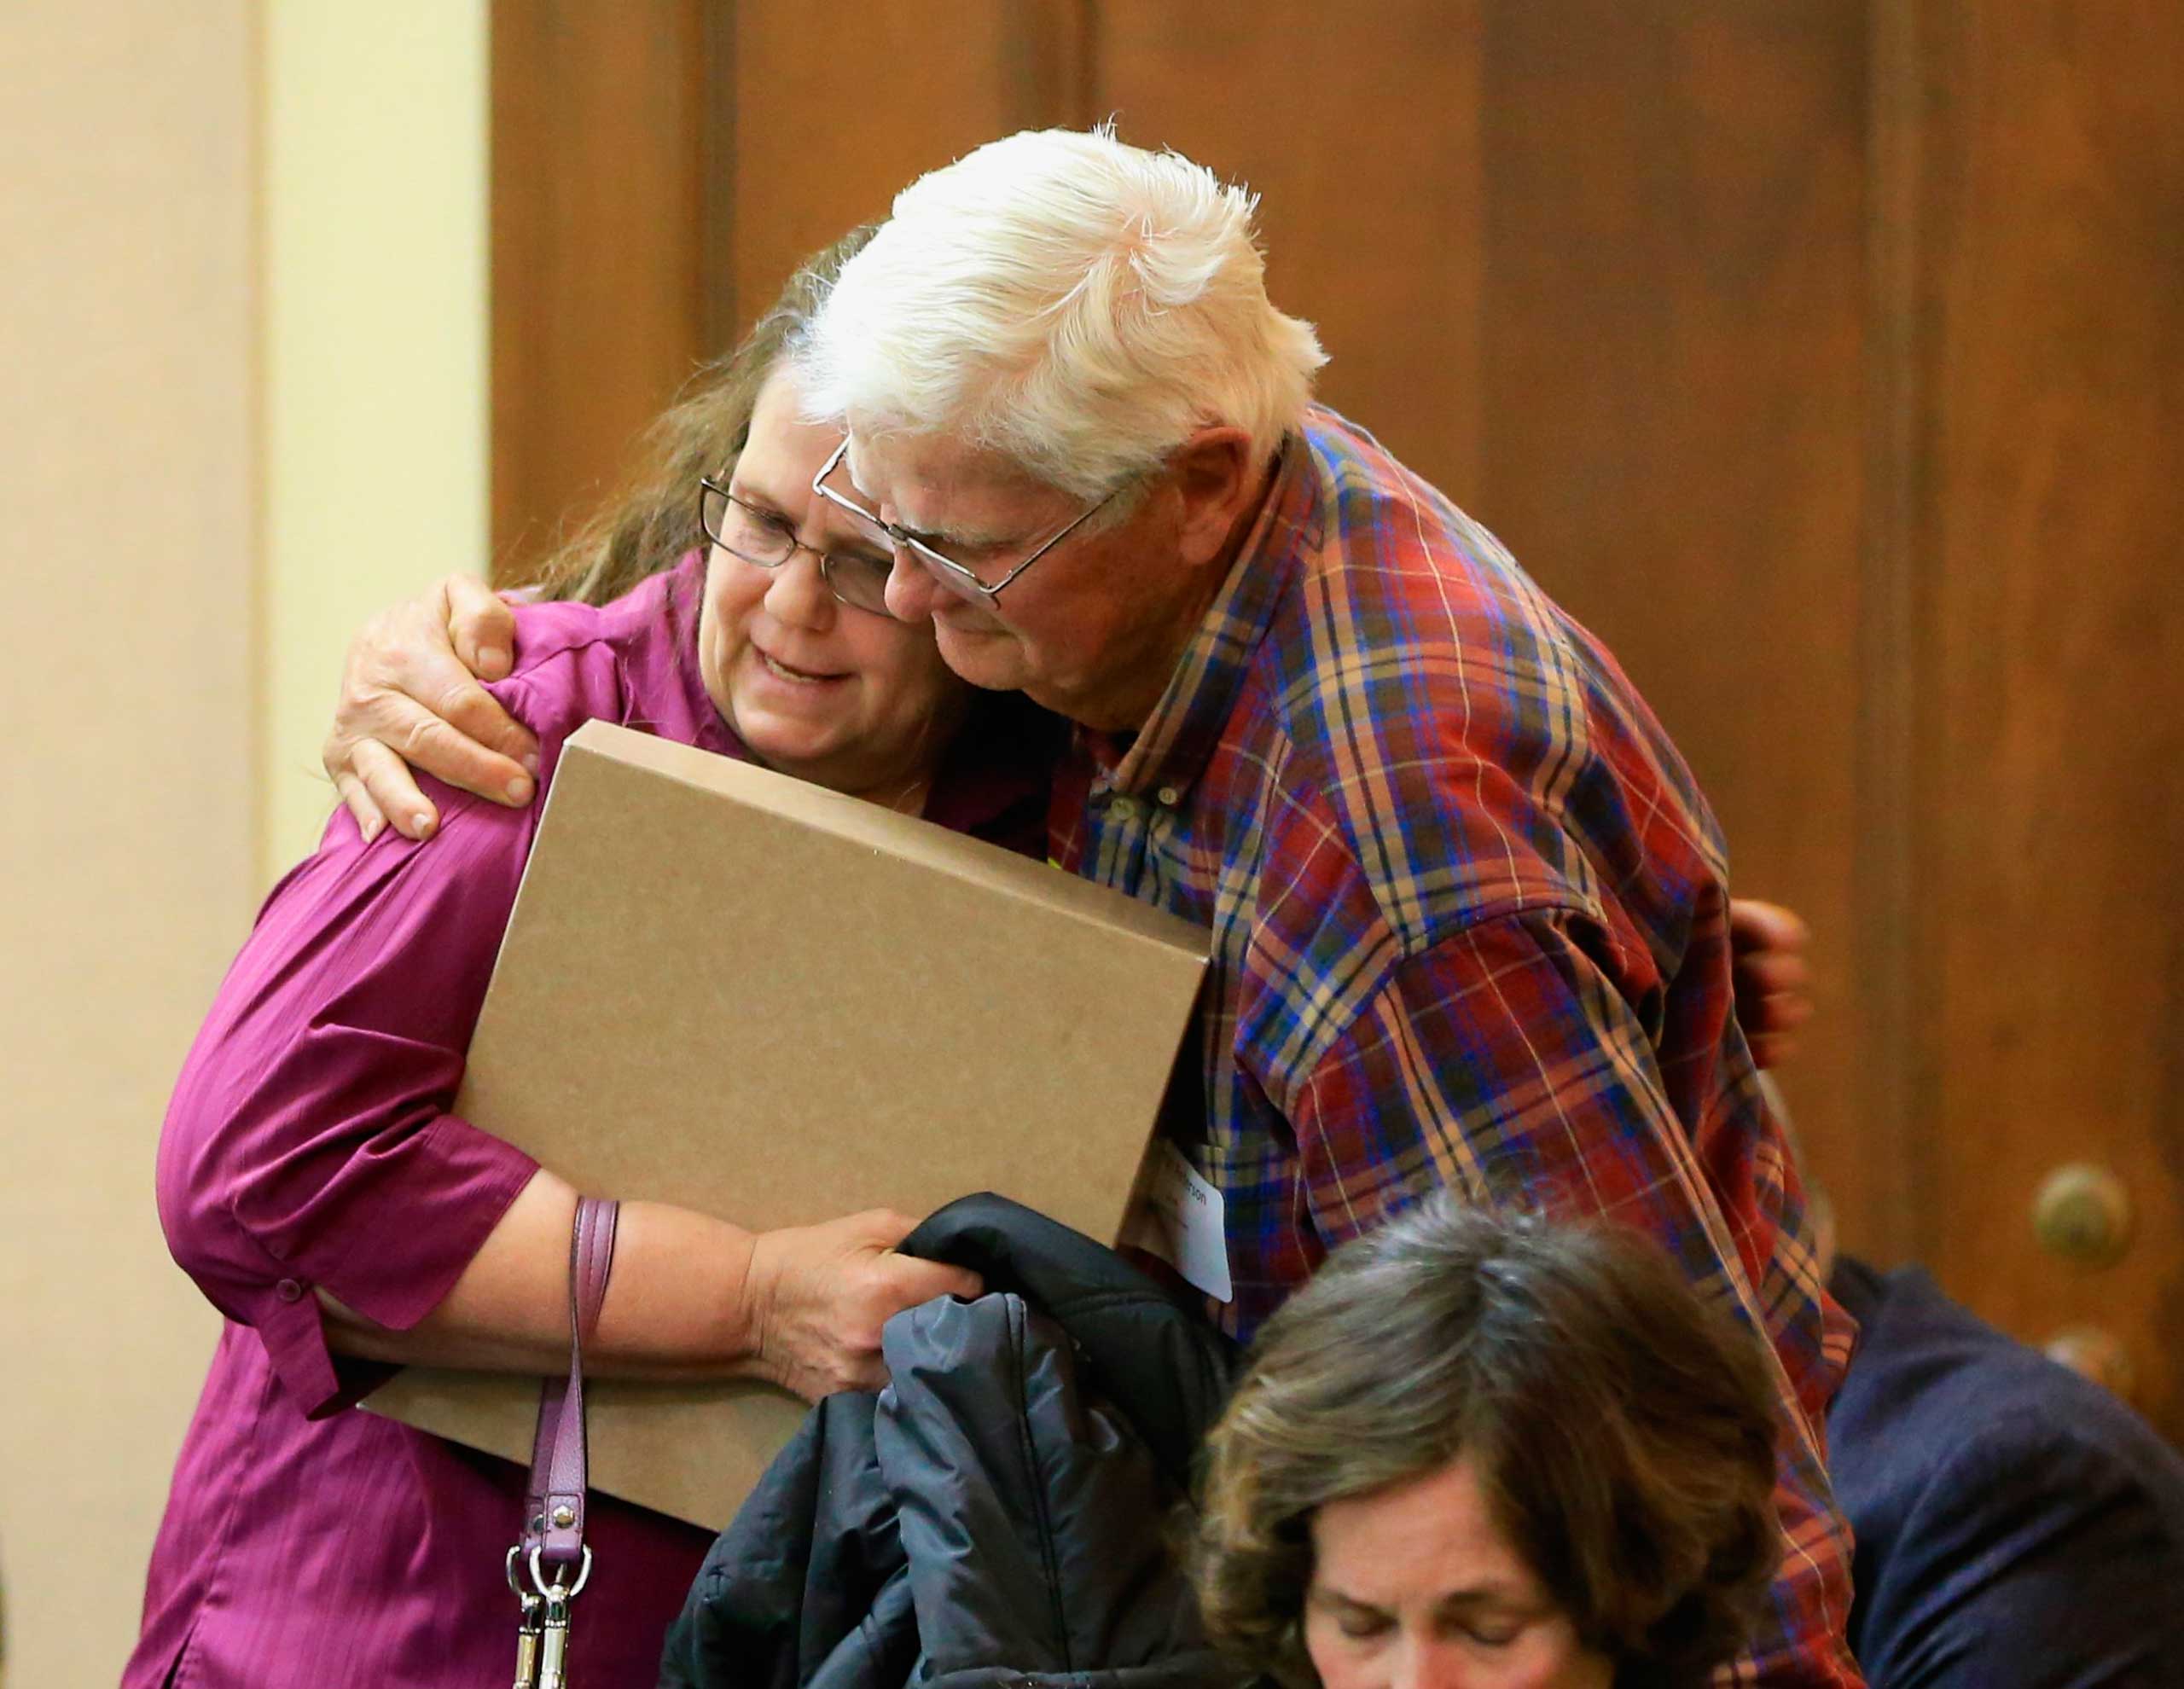 Miriam Thimm Kelle, left, whose brother James Thimm was tortured and killed on a southeast Nebraska farm in 1985, is hugged by Byron Peterson of Scottsbluff, after she testified in favor of a law proposal to change the death penalty to life imprisonment without parole, during a hearing before the Judiciary Committee in Lincoln, Neb., March 4, 2015. (Nati Harnik—AP)